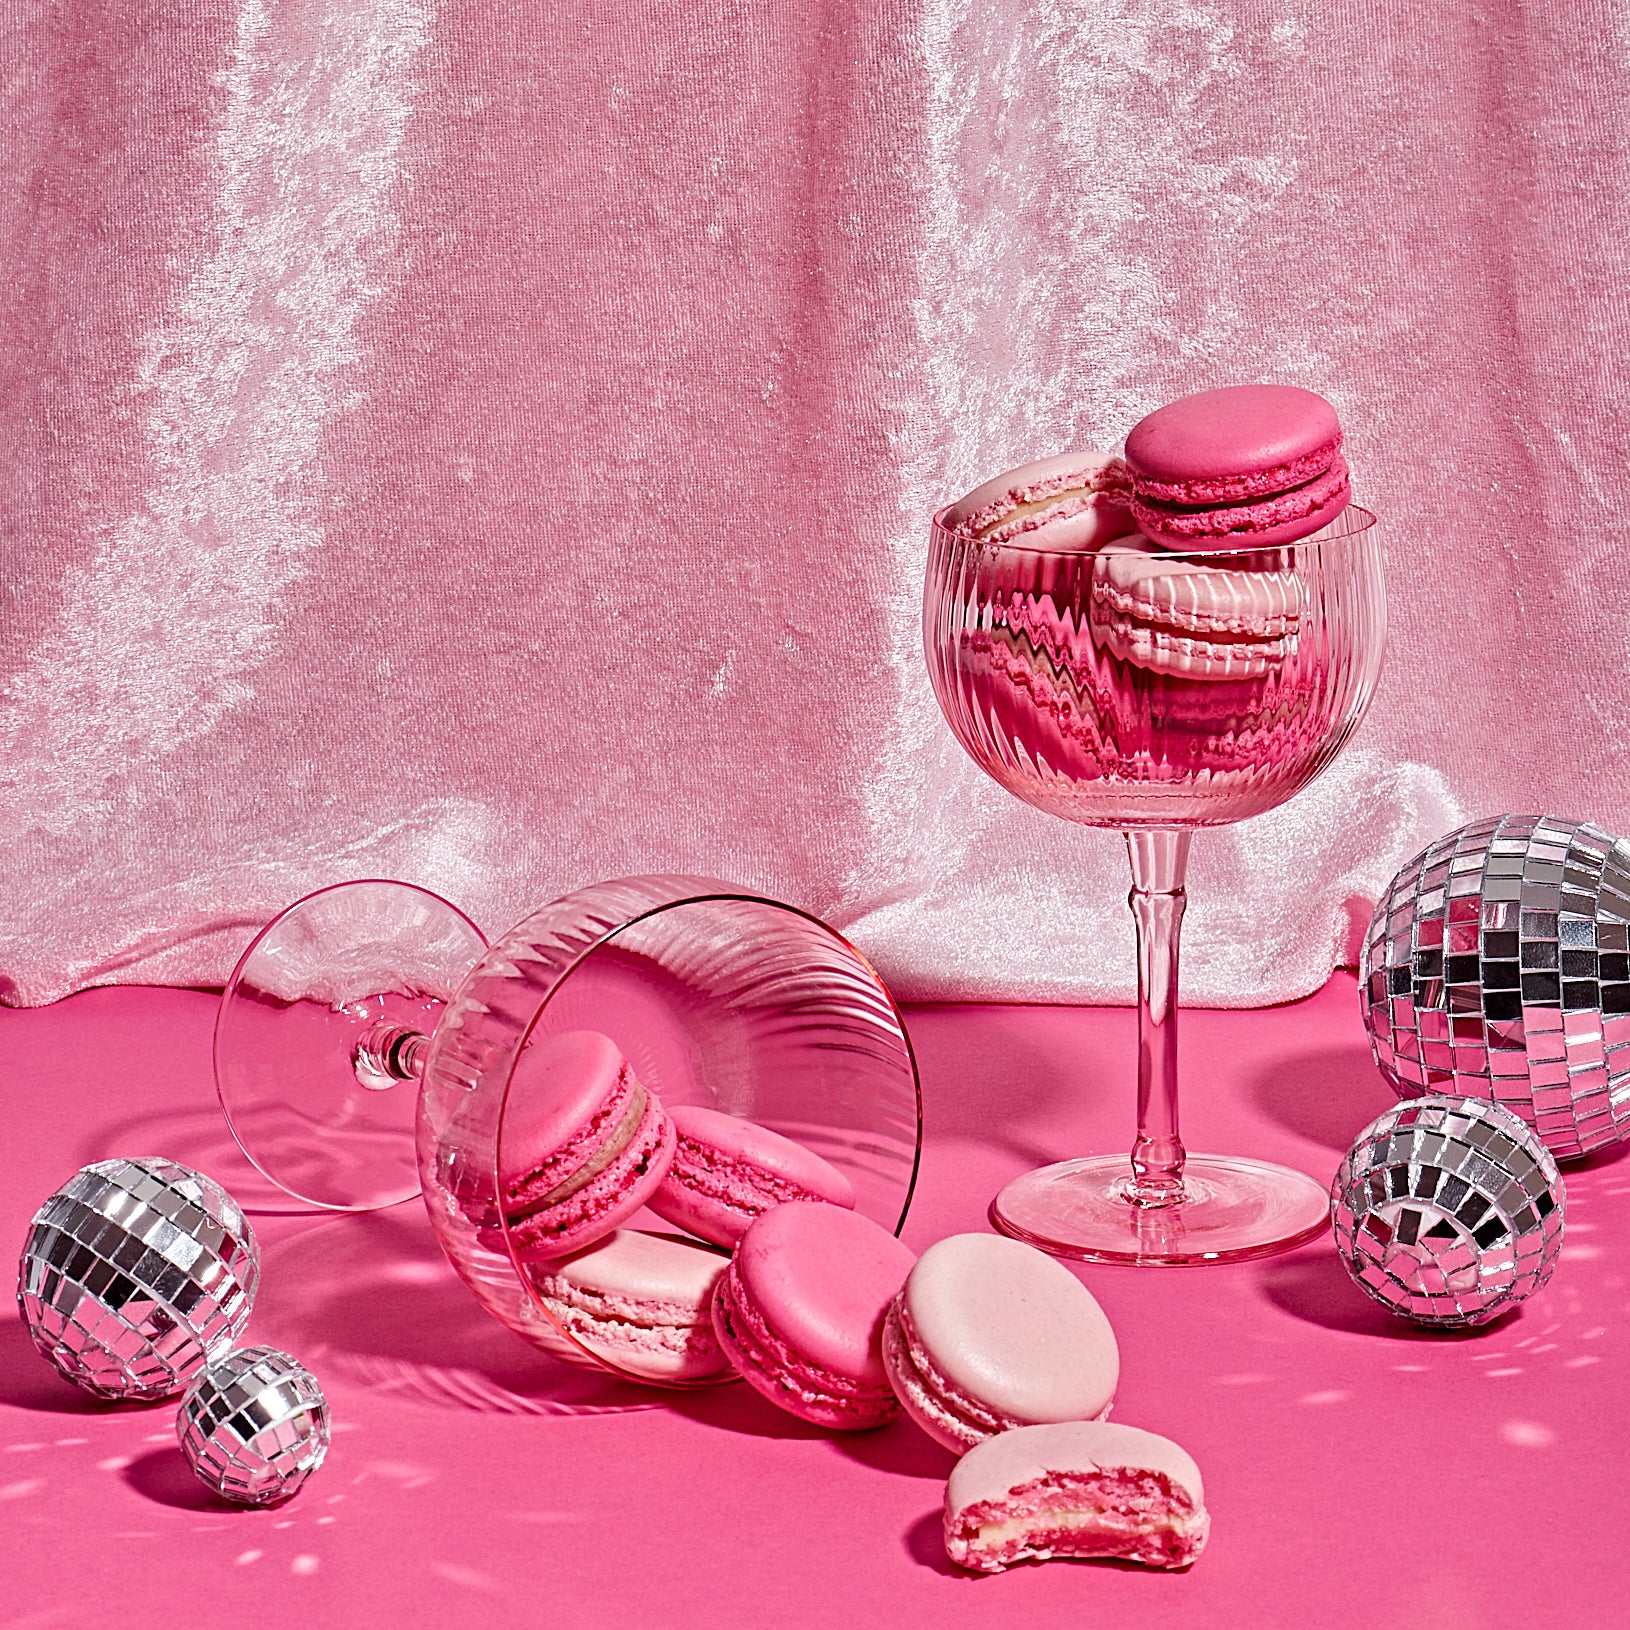 Two pink coupe glasses filled with various shades of pink, Valentine's themed macarons surrounded by small disco balls and placed on a pink backdrop. The coupe glass on the left has spilled, leaving a trail of macarons. The coupe glass on the right is upright and filled to the brim with macarons.